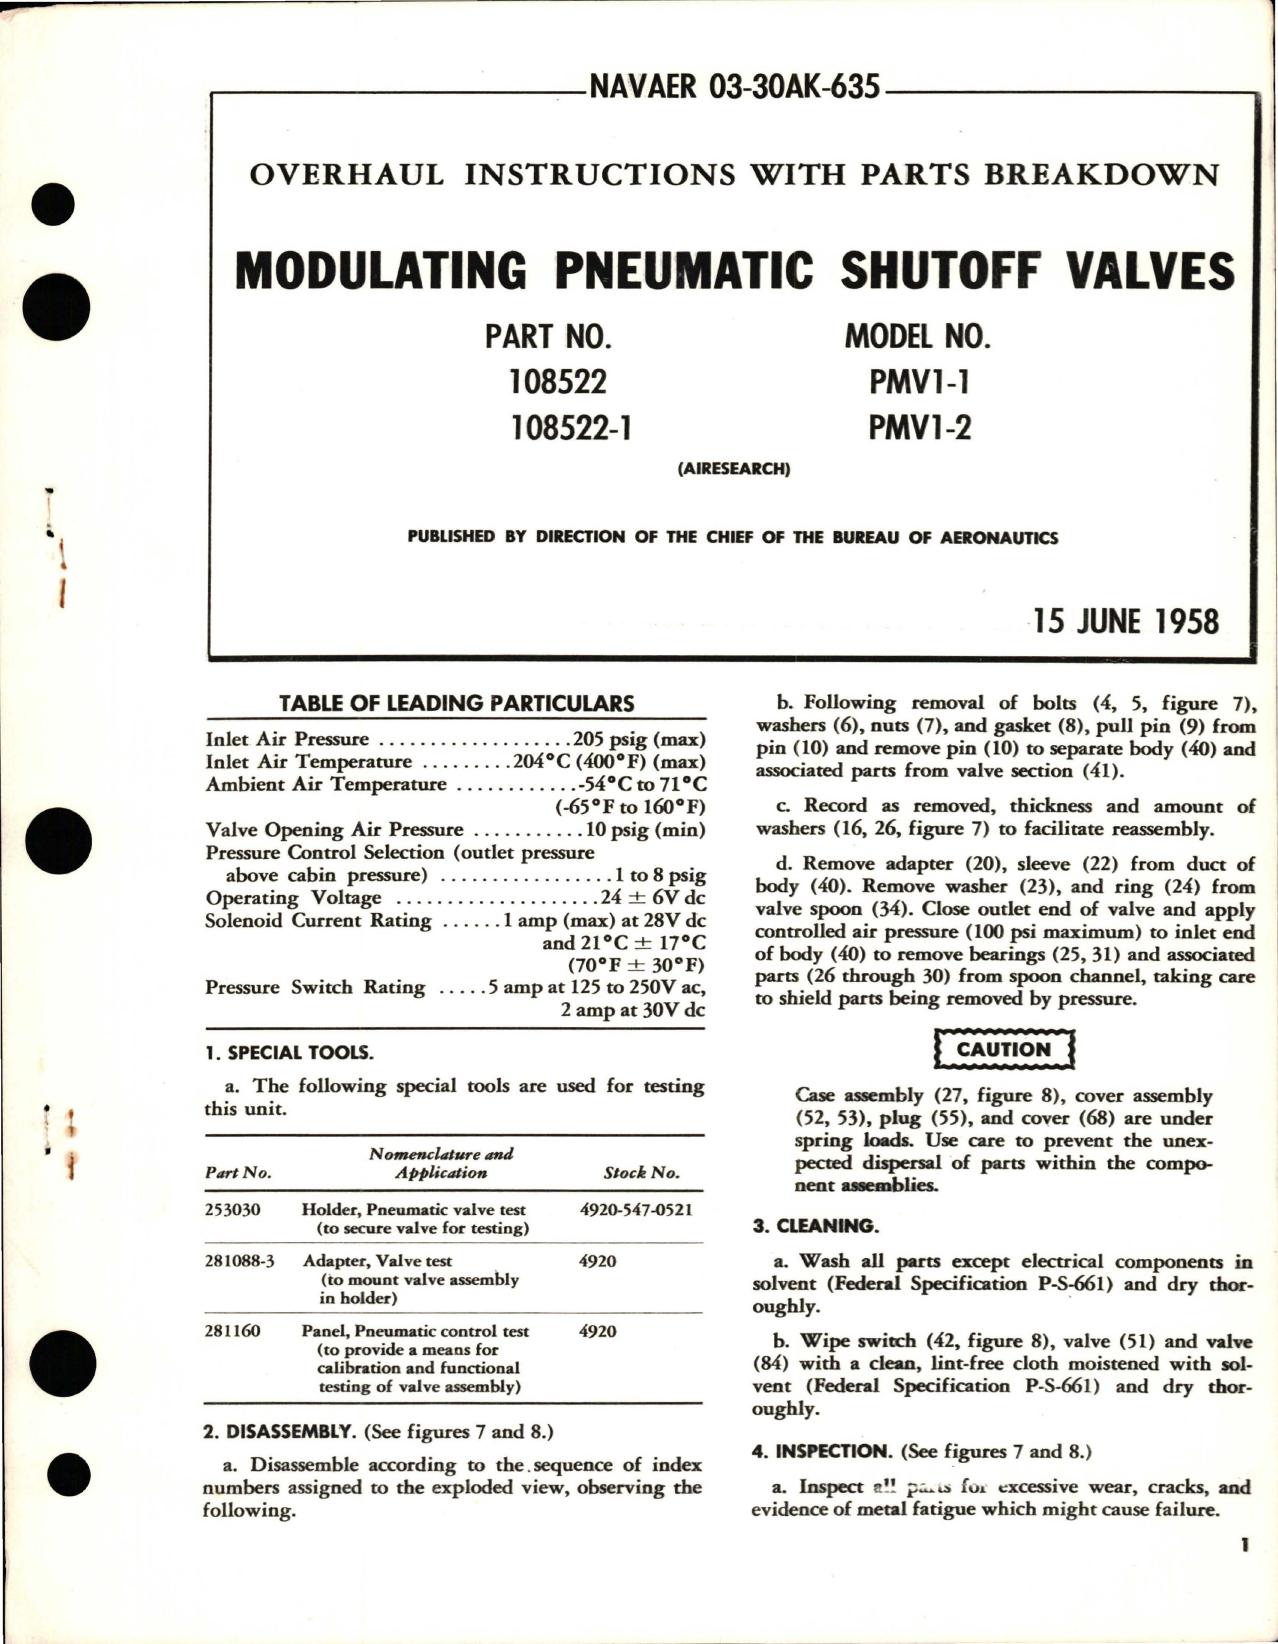 Sample page 1 from AirCorps Library document: Overhaul Instructions with Parts Breakdown for Modulating Pneumatic Shutoff Valves - Parts 108522 and 108522-1 - Models PMV1-1 and PMV1-2 